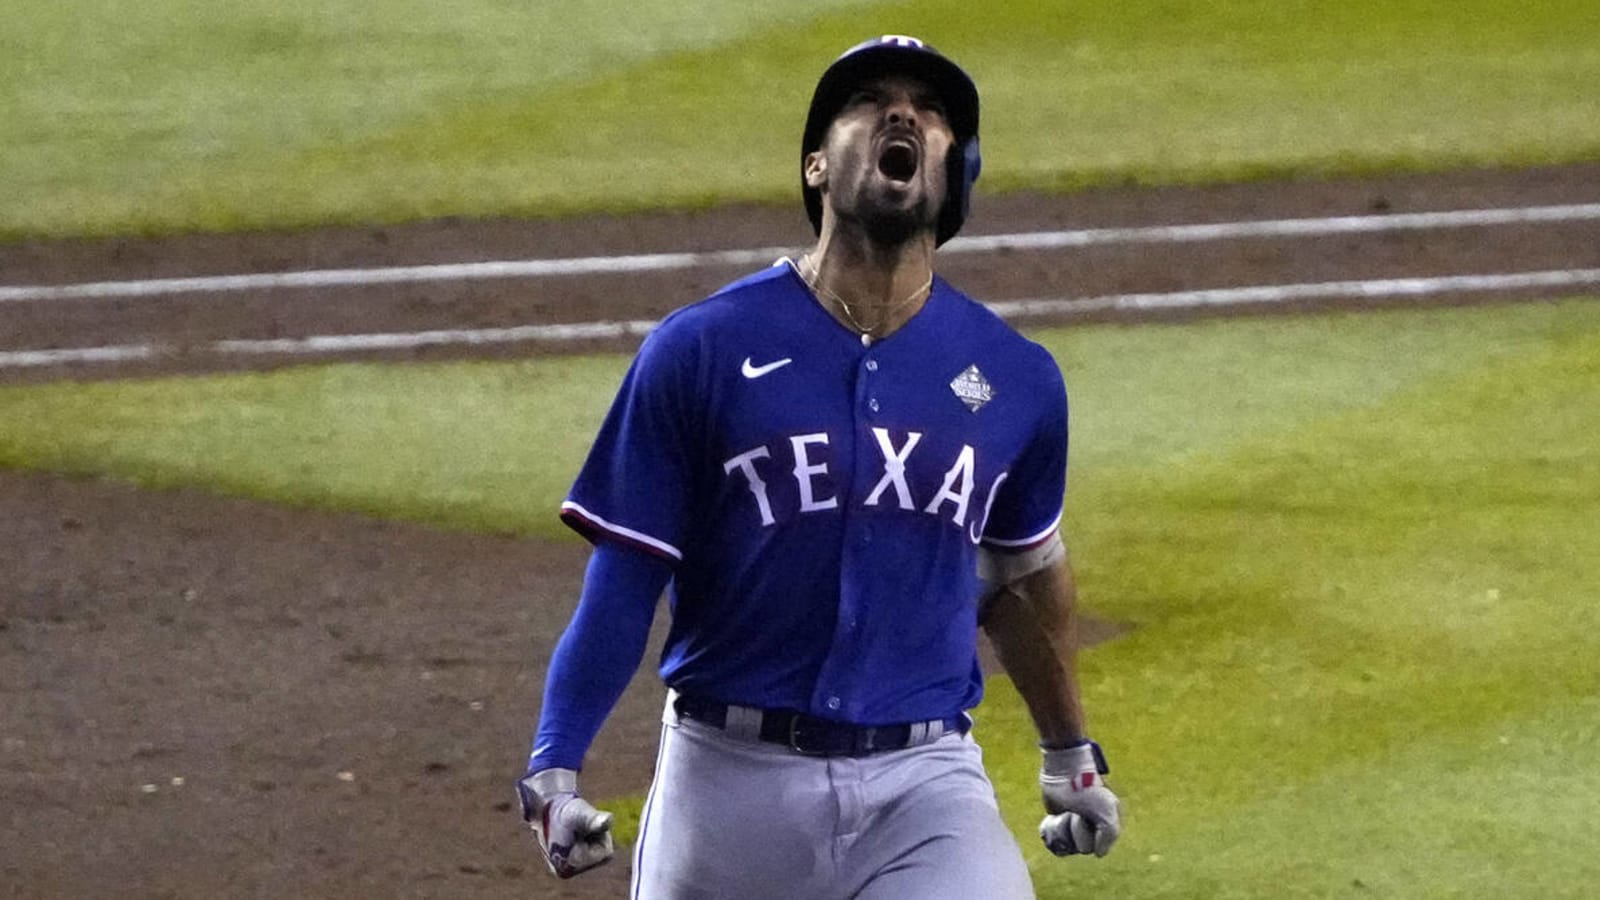 Marcus Semien and the Texas Rangers have won the World Series